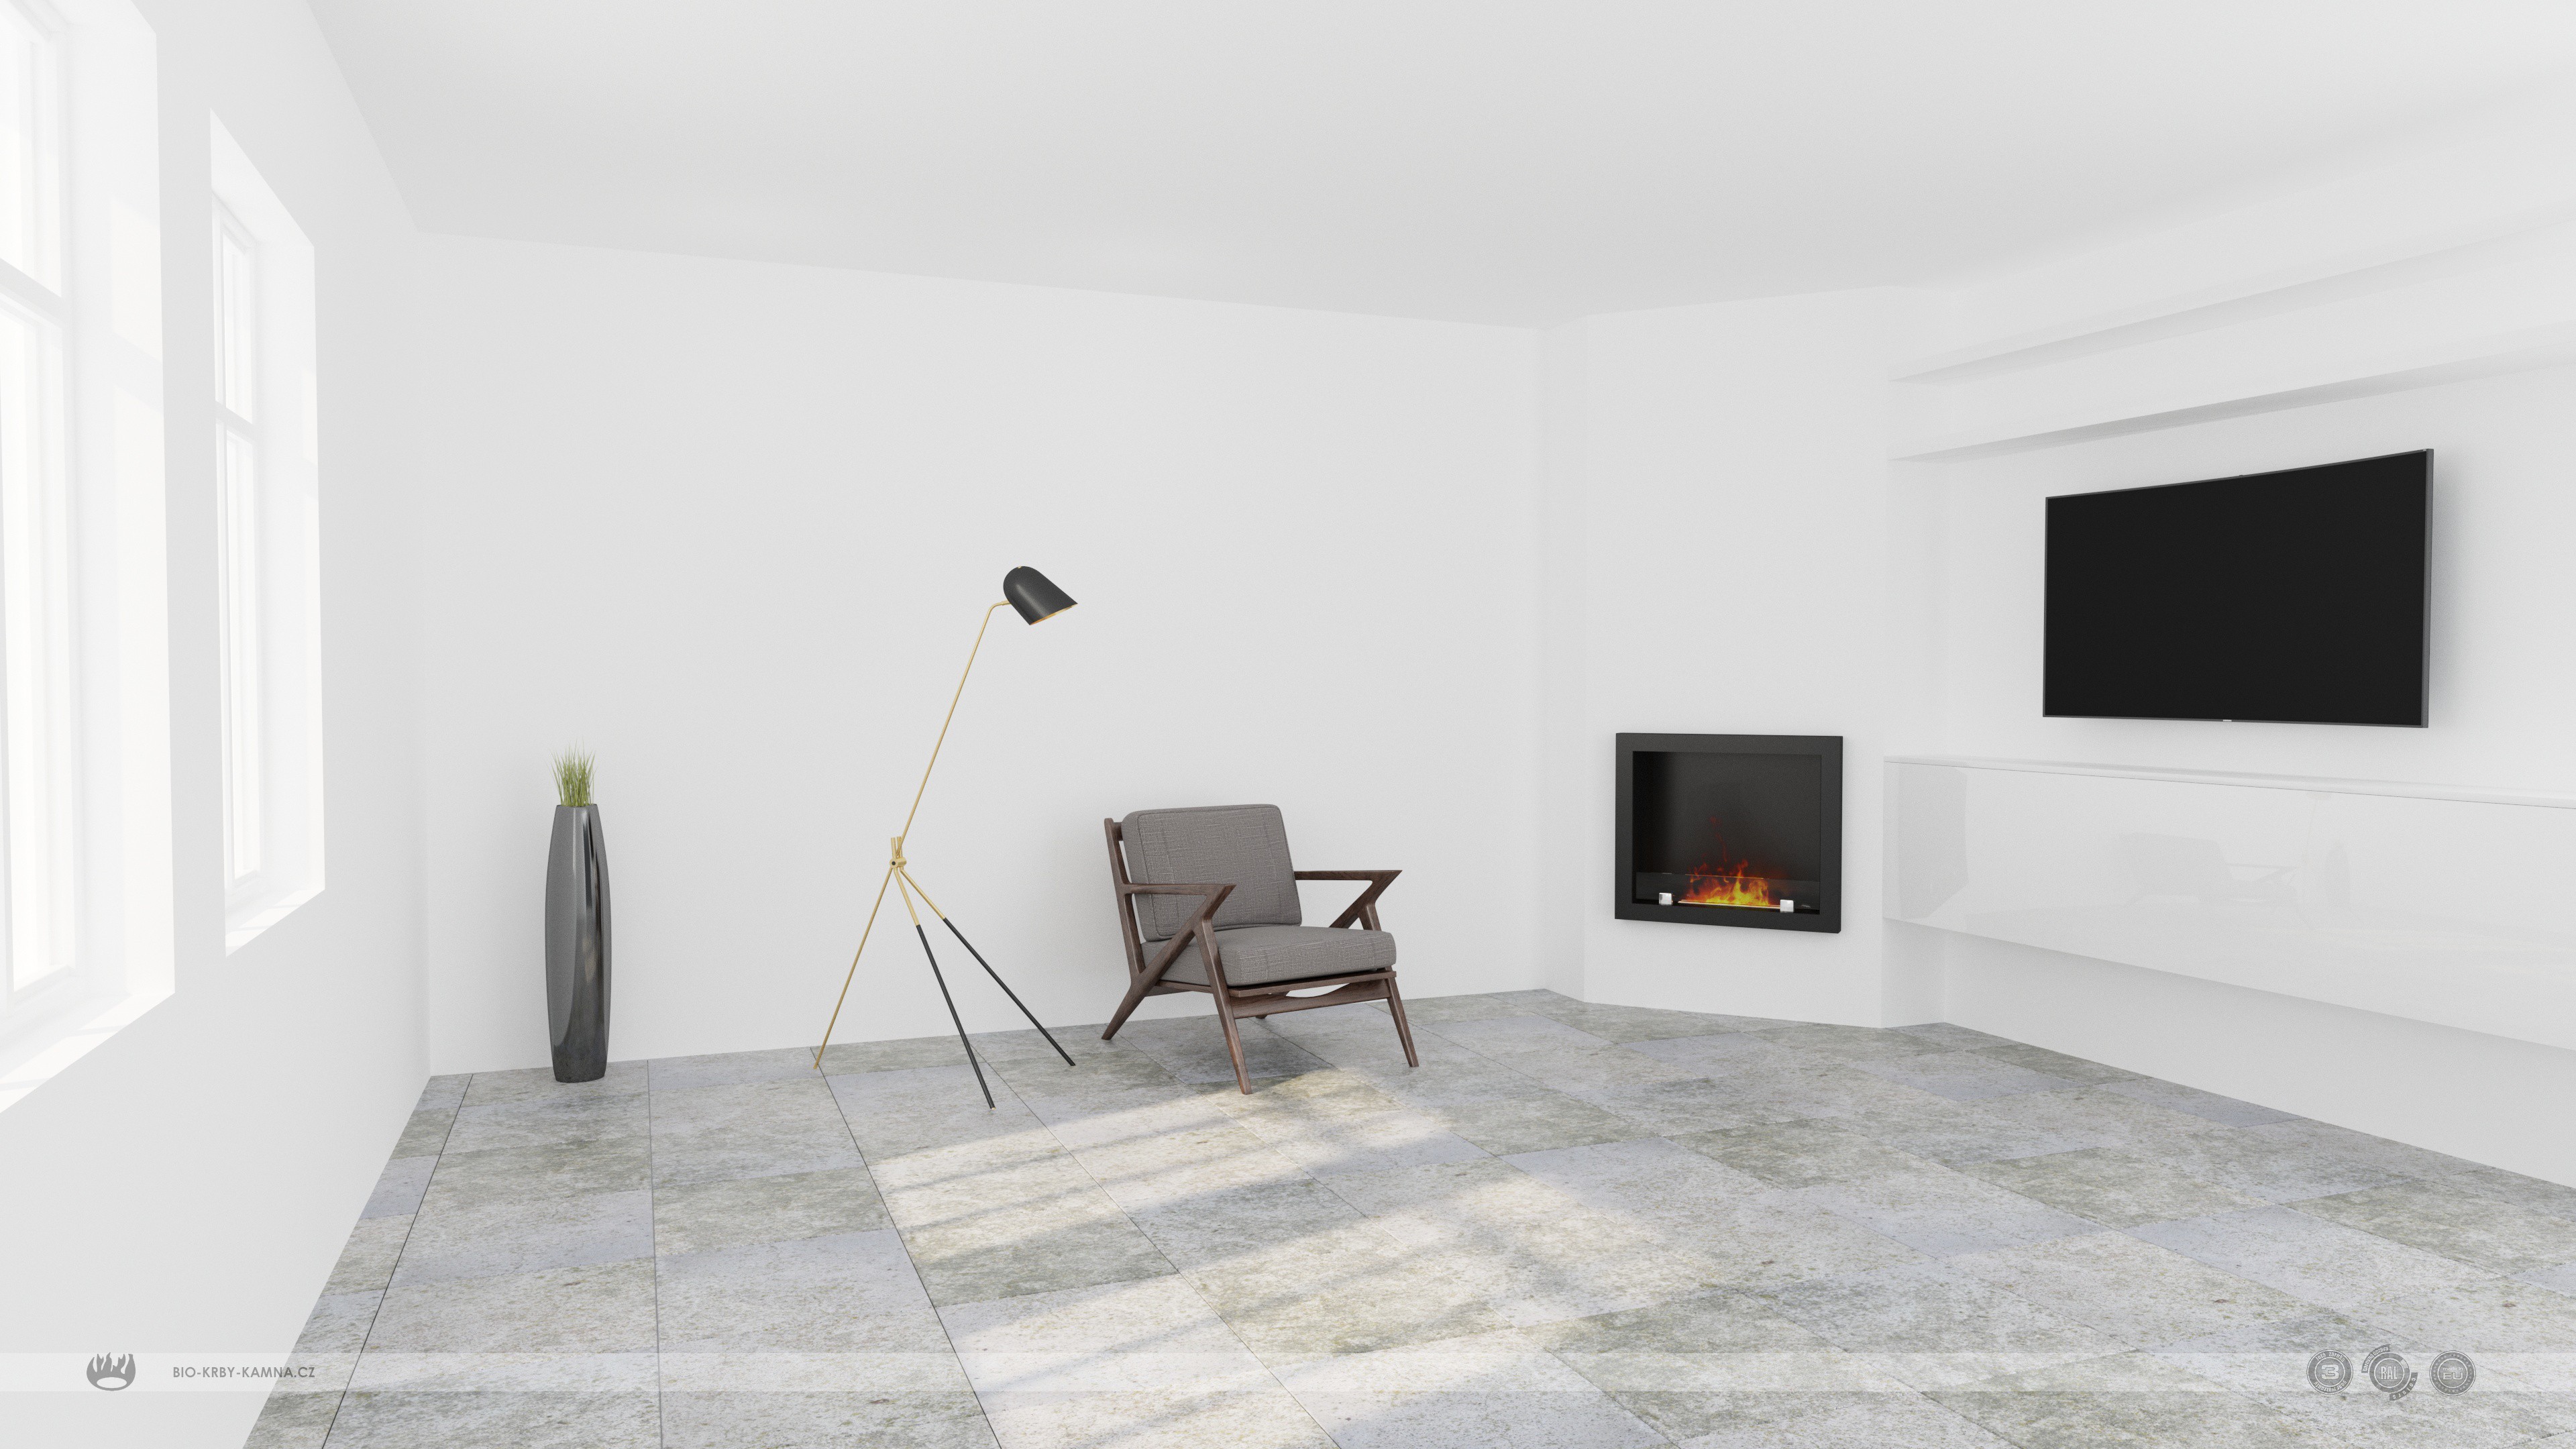 Fireplace without chimney AF-66